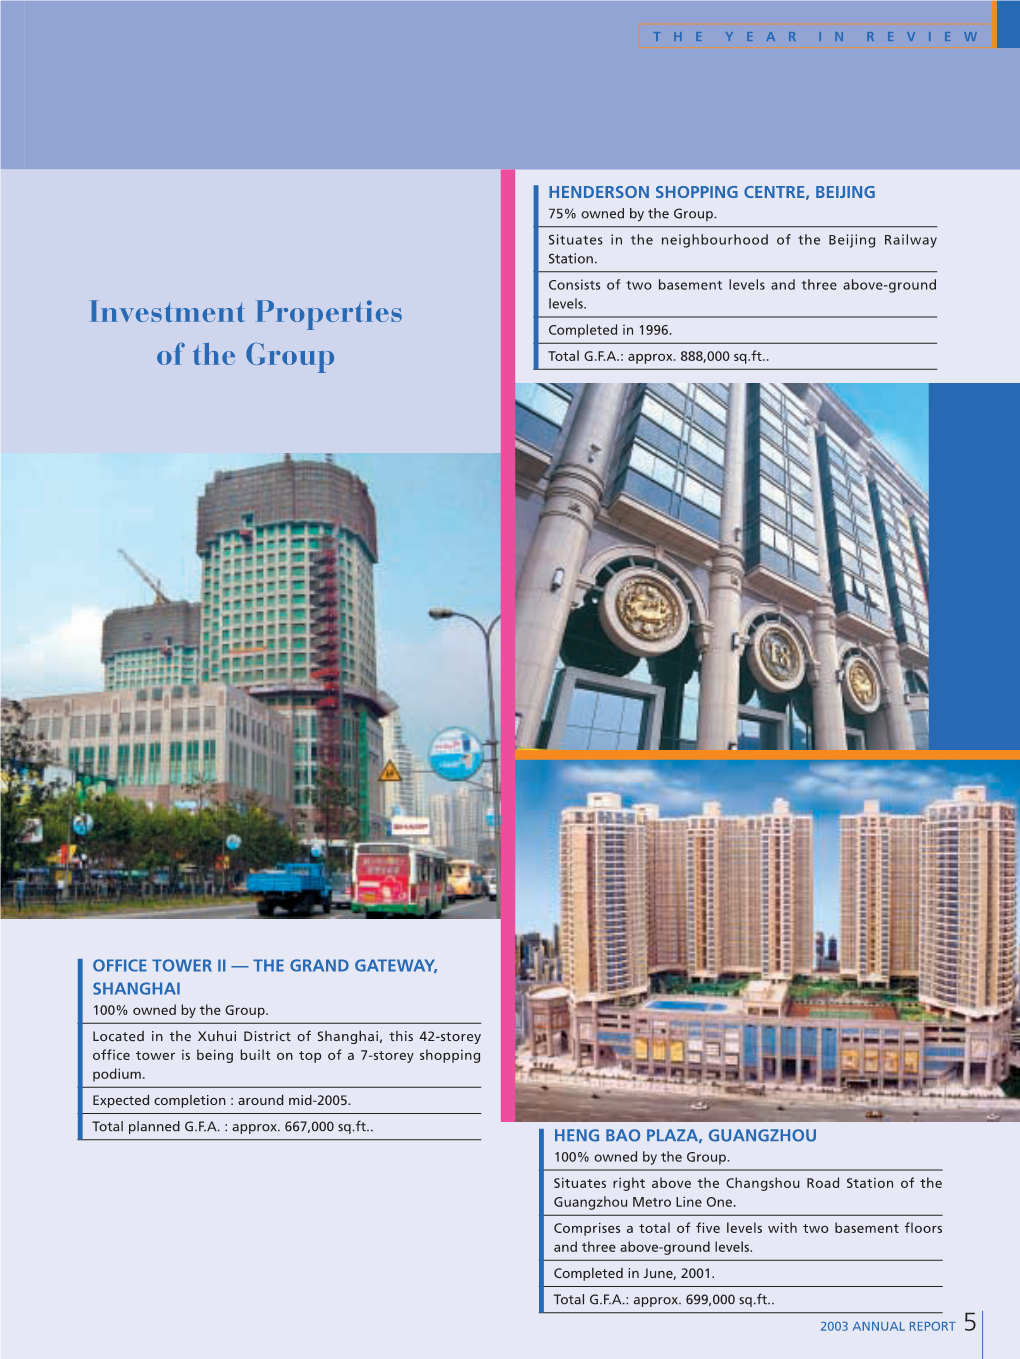 Investment Properties of the Group